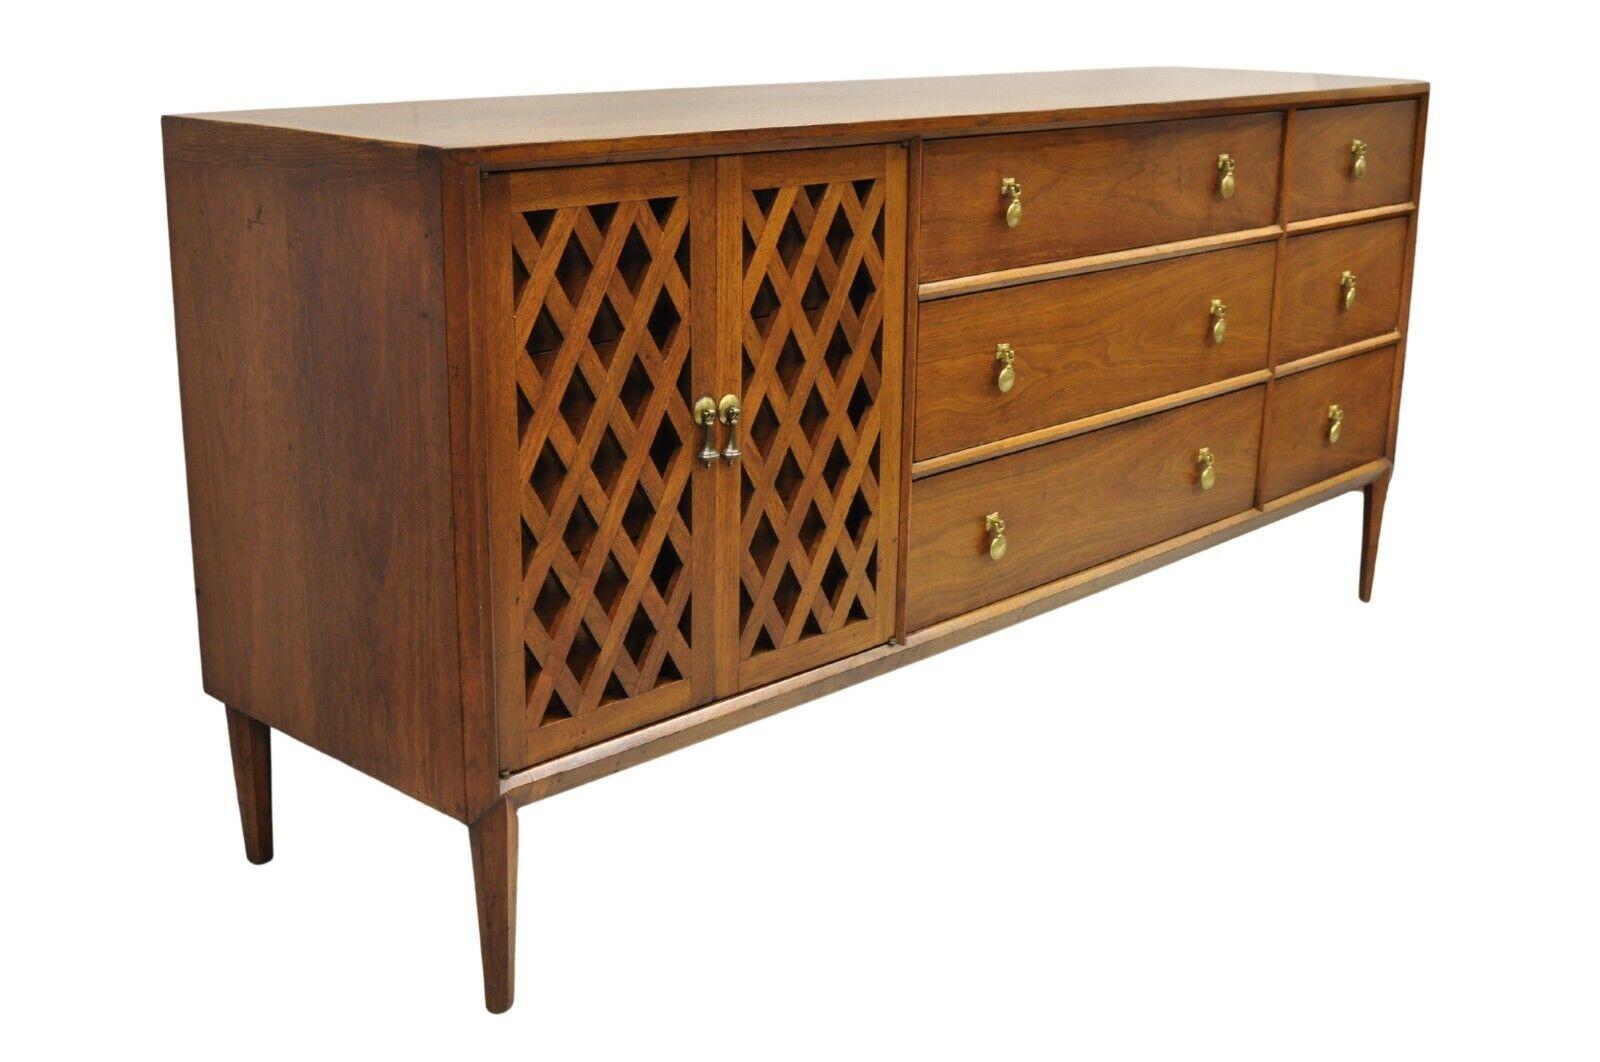 John Stuart Casalinda Collection for Mt Airy Furniture Vintage Mid Century Modern Walnut Credenza Cabinet Triple Dresser. Item features 9 dovetailed drawers, brass pulls, nice clean angles to sides, beautiful wood grain, original makers mark. Circa